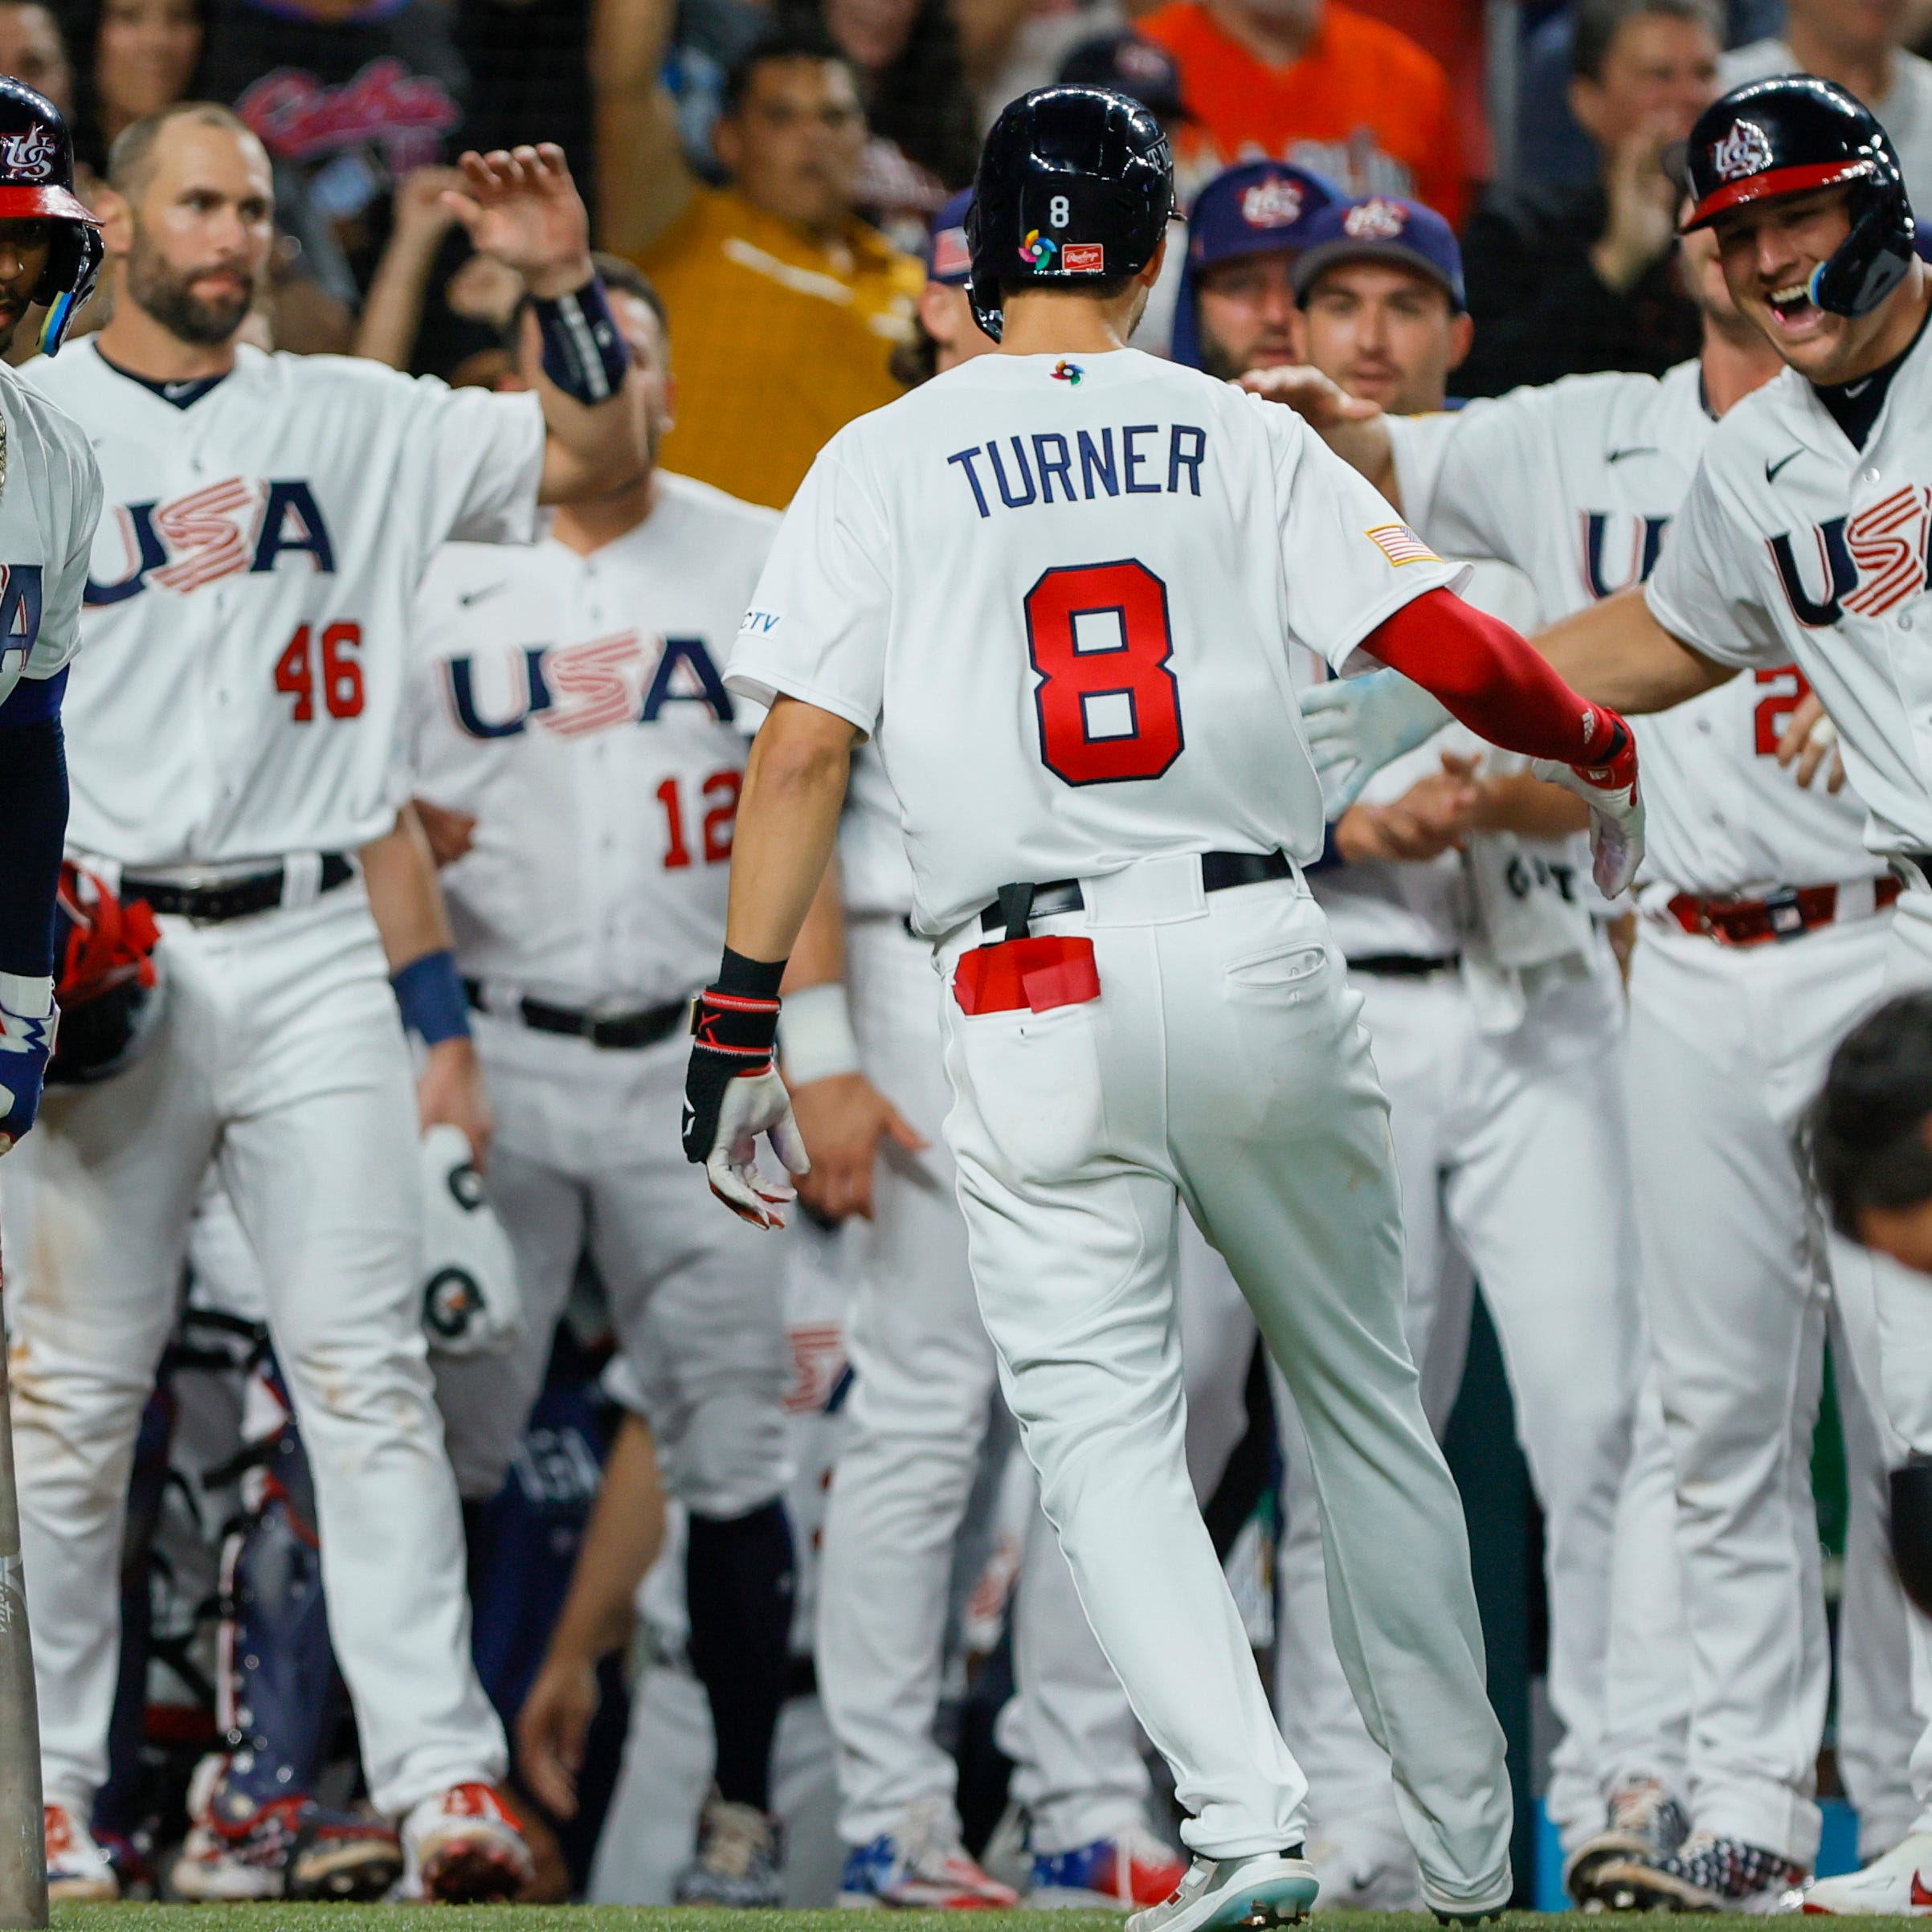 USA shortstop Trea Turner has been on fire in the World Baseball Classic with four home runs and 10 RBI.